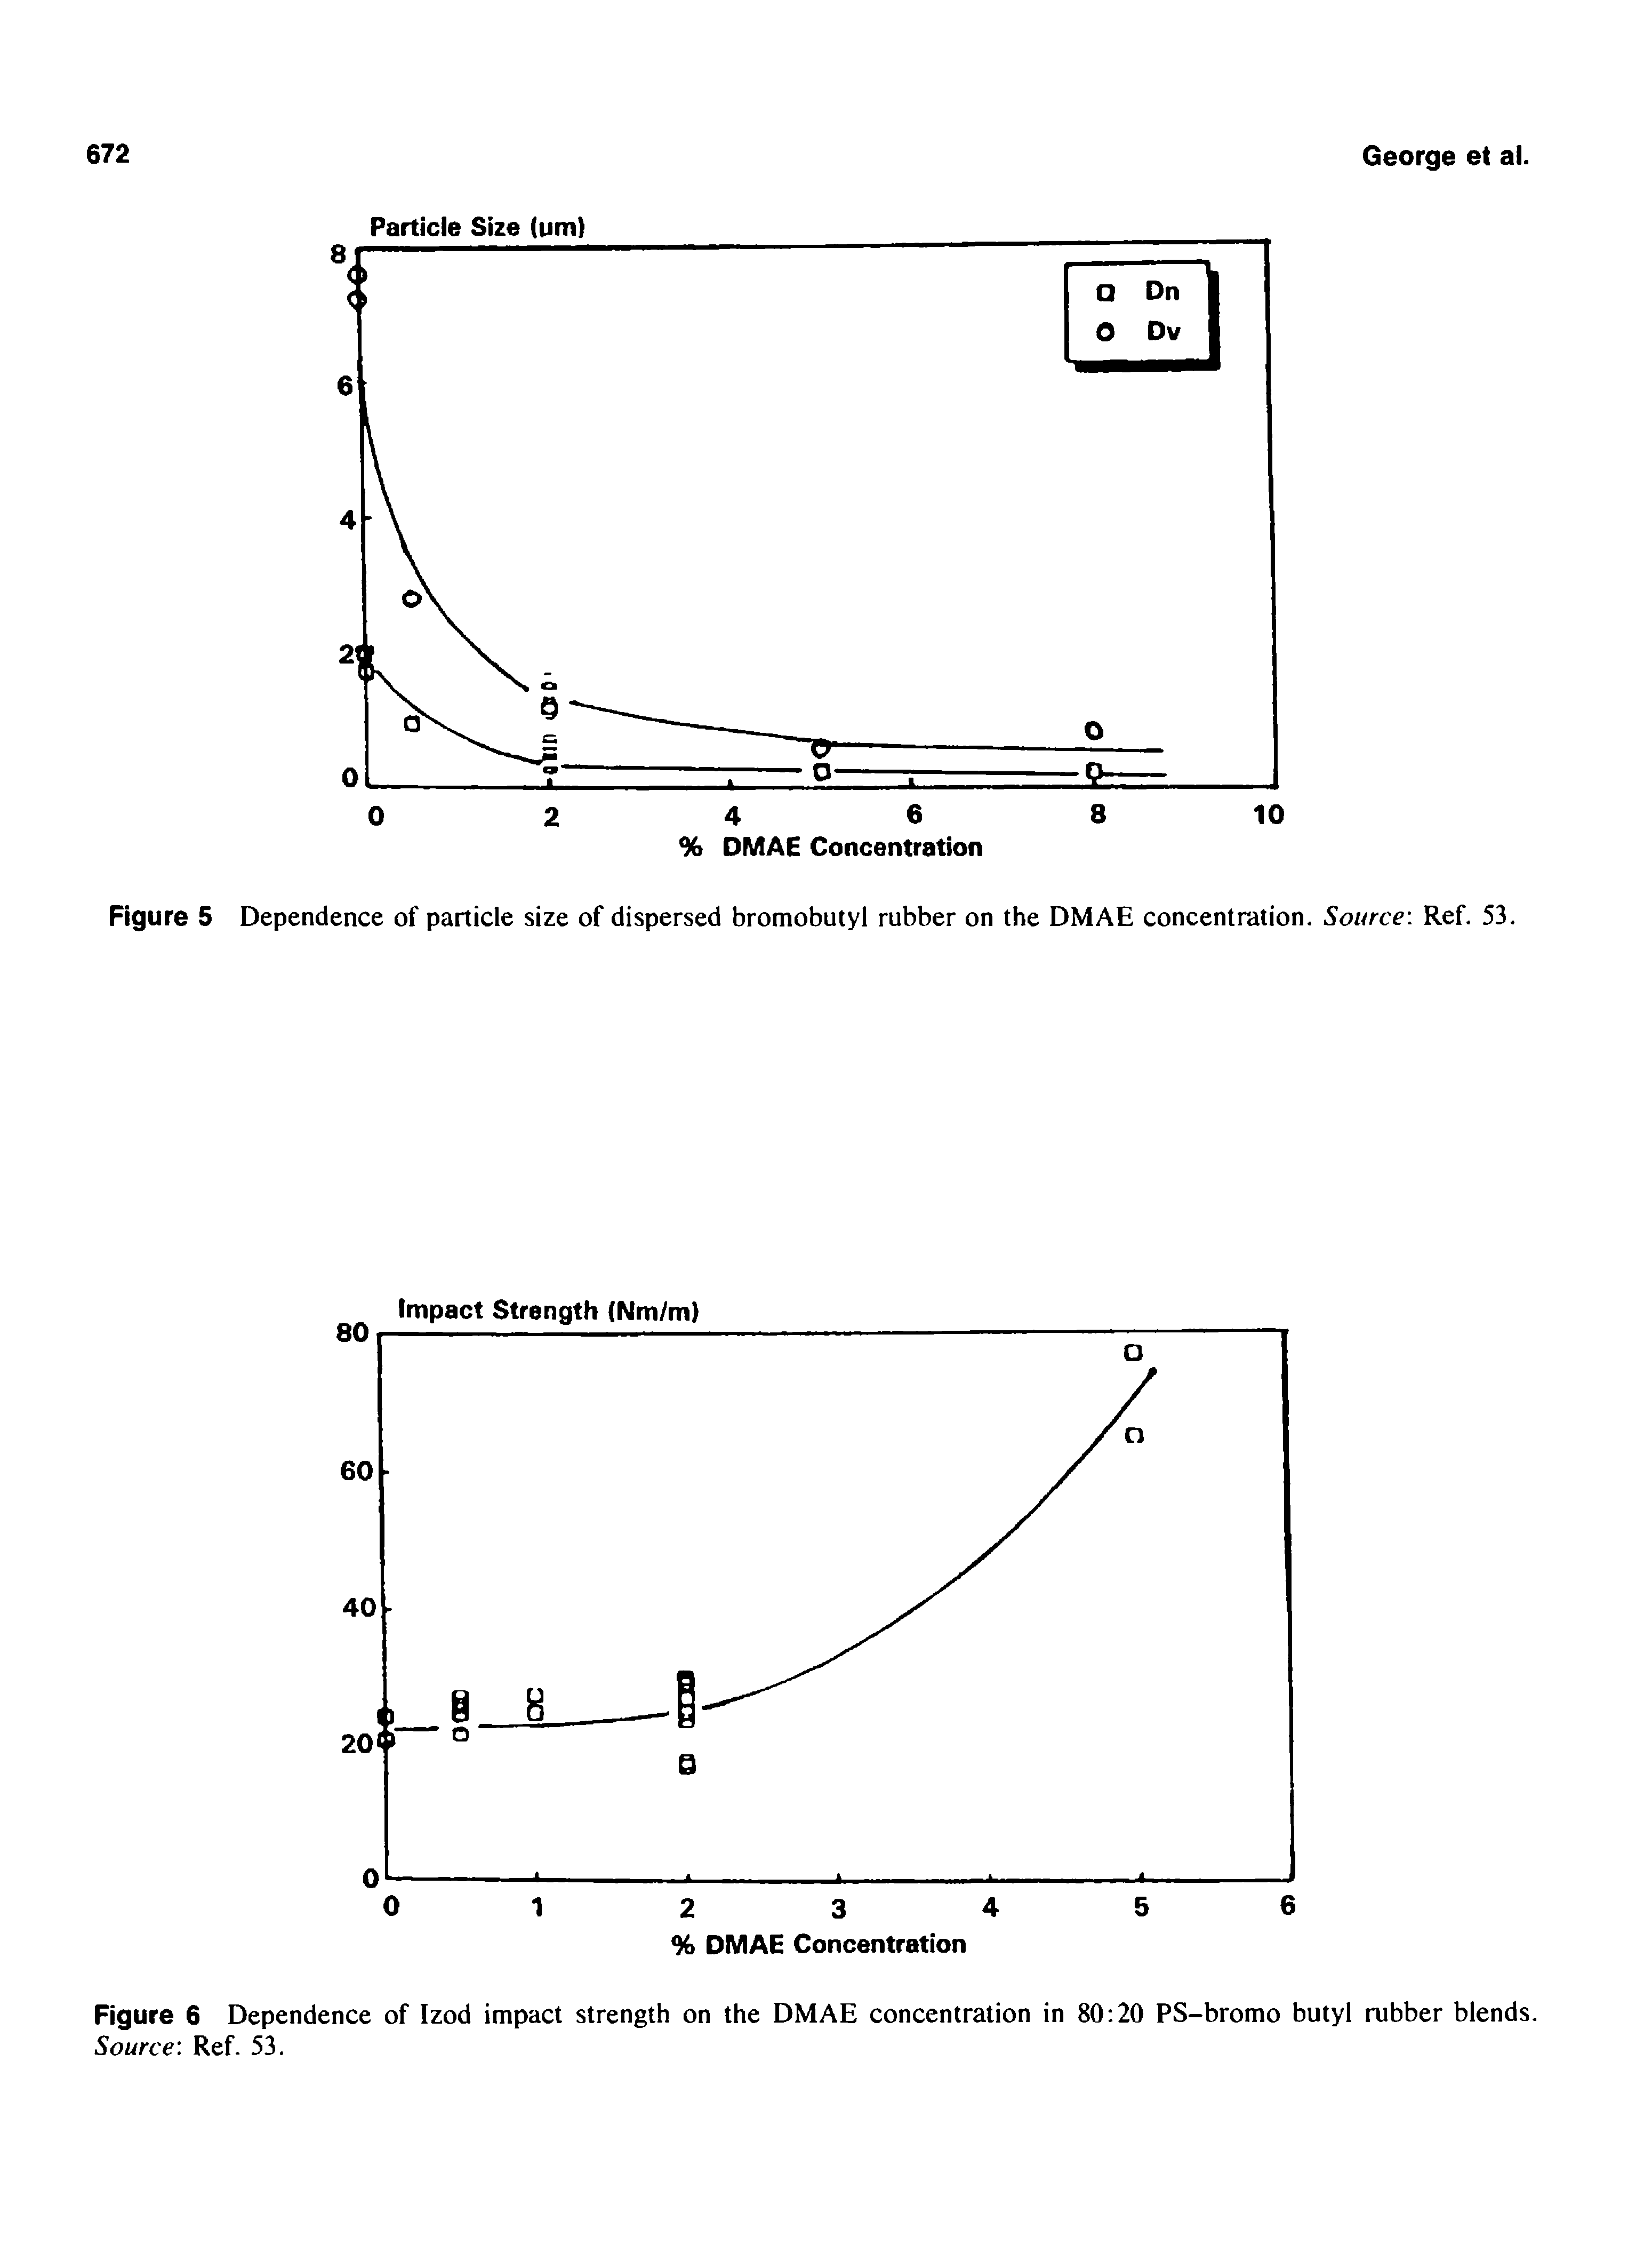 Figure 6 Dependence of Izod impact strength on the DMAE concentration in 80 20 PS-bromo butyl rubber blends. Source Ref. 53.